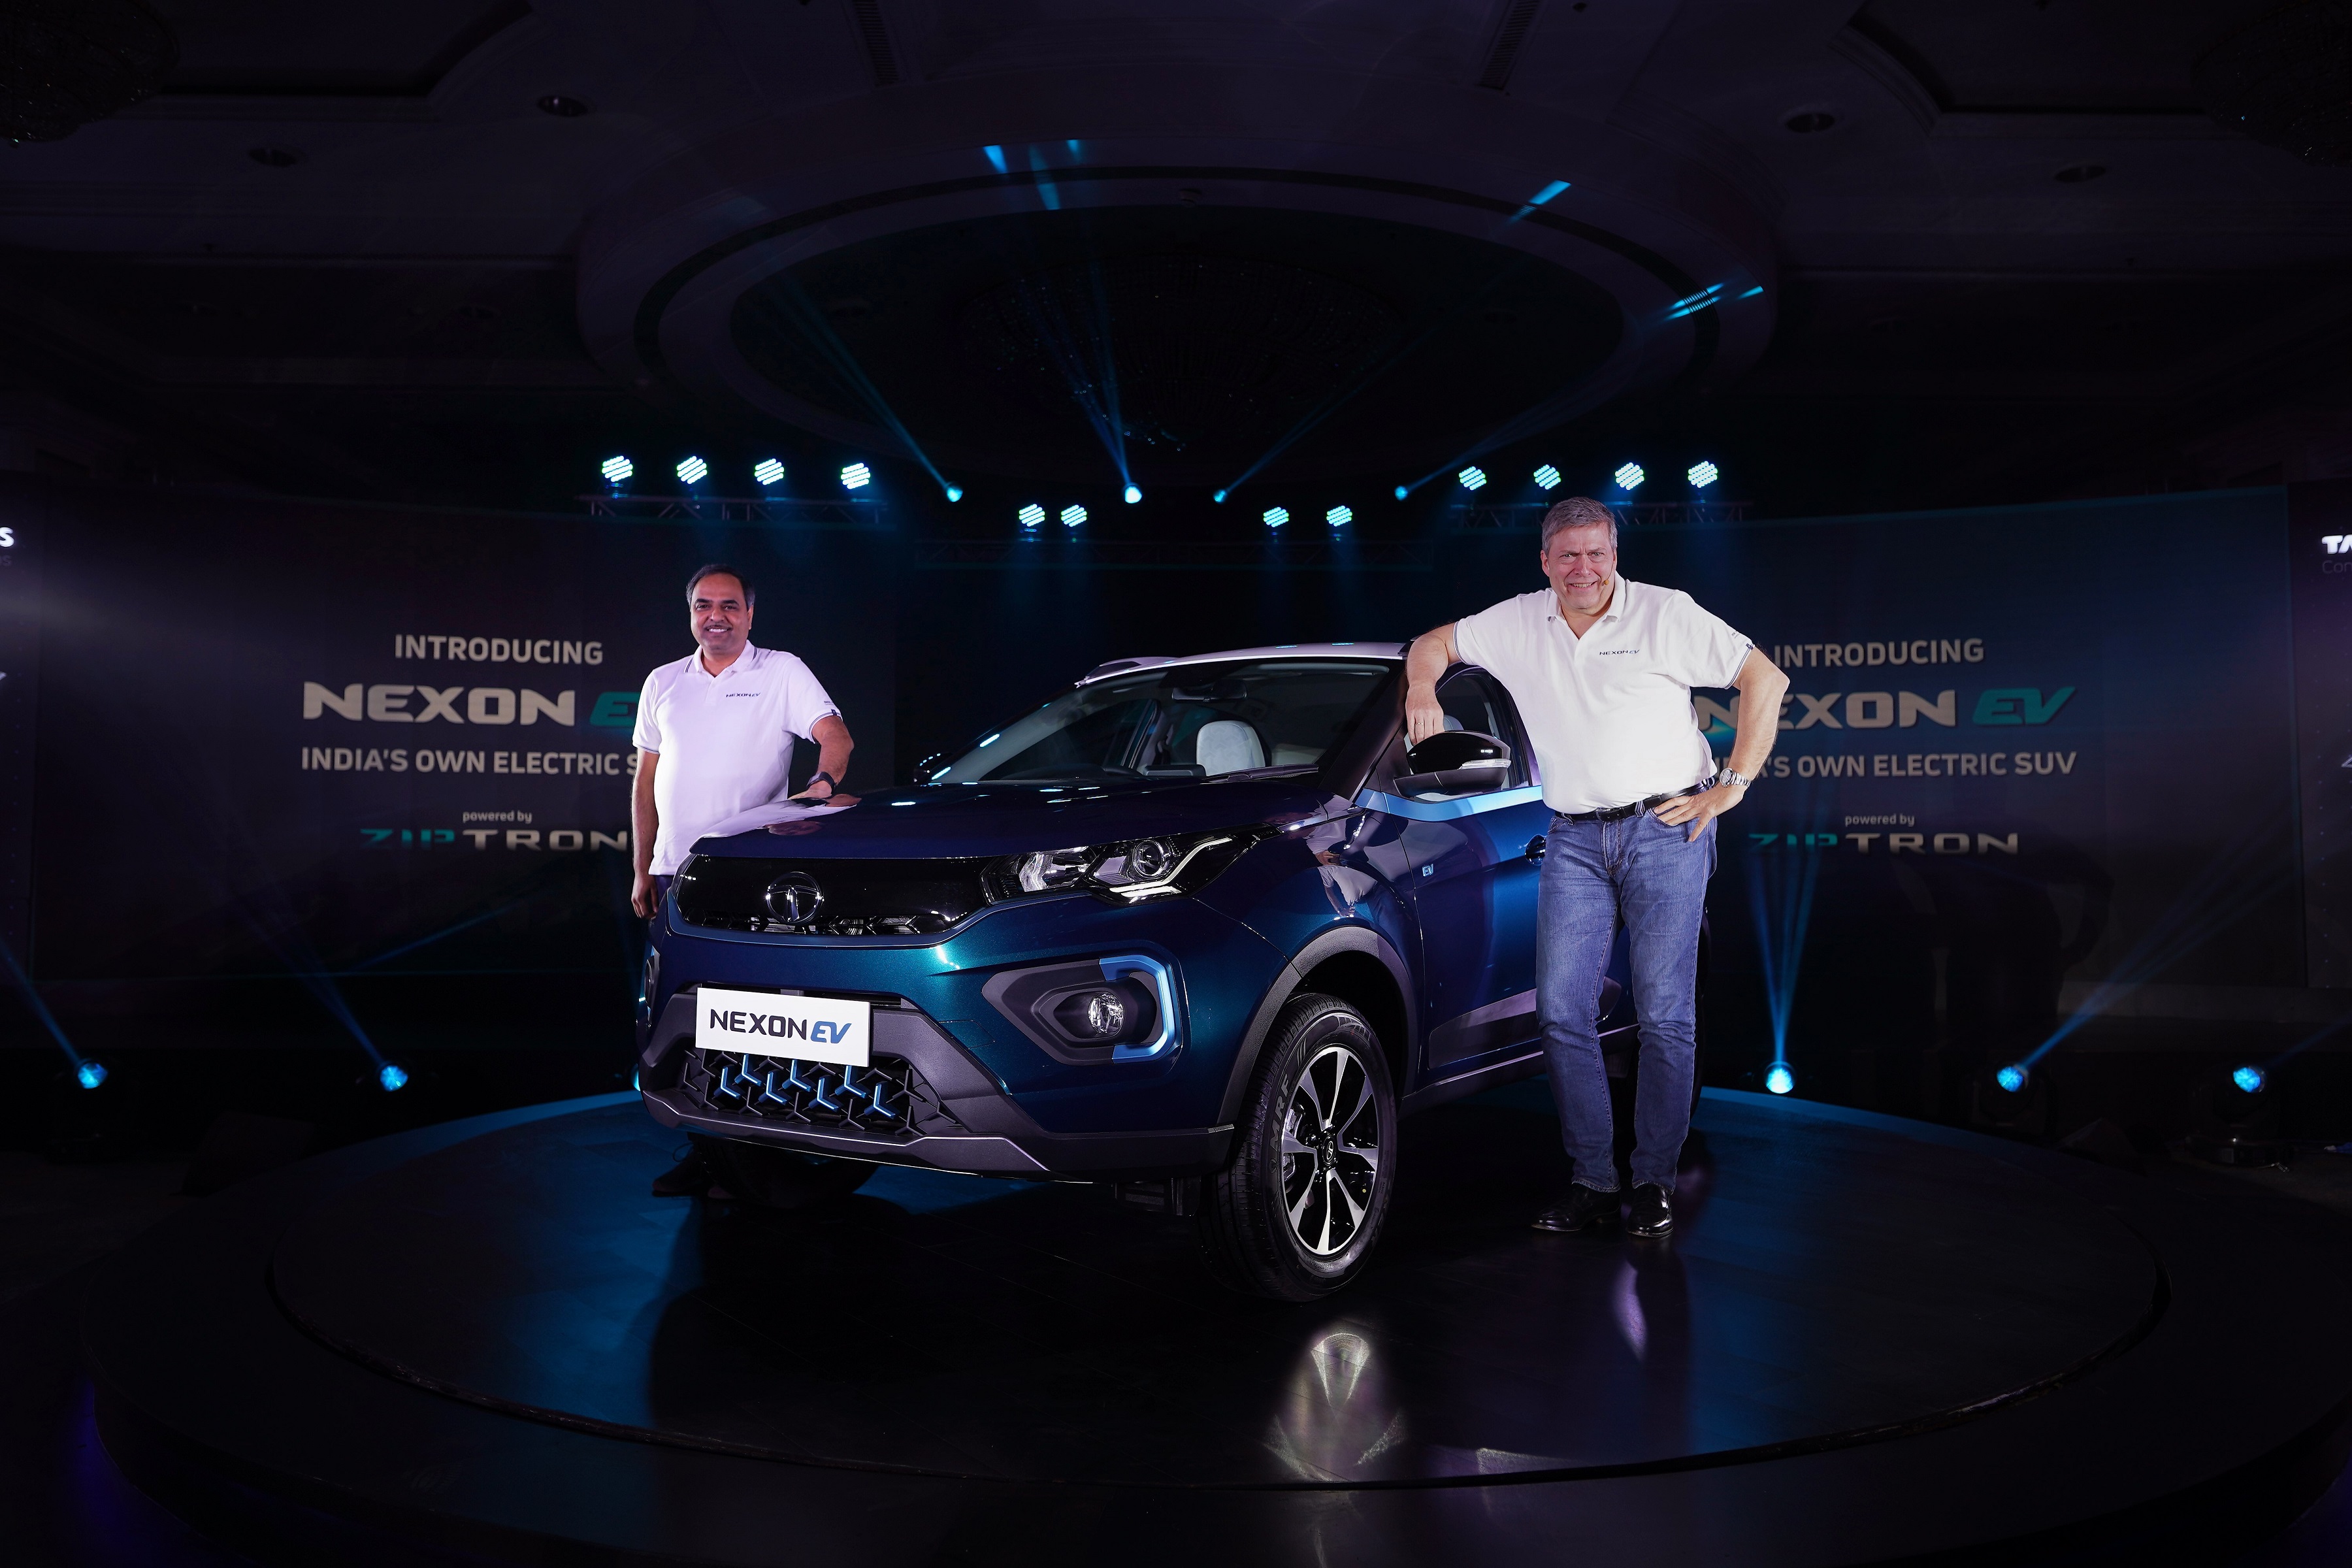 Mr. Guenter Butschek, CEO & Managing Director, Tata Motors Ltd. and Mr. Shailesh Chandra, President – Electric Mobility Business & Corporate Strategy, Tata Motors Ltd. unveil India’s own Electric SUV, the Nexon EV, today. Powered by the cutting-edge Ziptron technology, this aspirational SUV promises an efficient high voltage system, zippy performance, long-range, fast charging capability, extended battery life and class leading safety features -Photo By Sachin Murdeshwar GPN